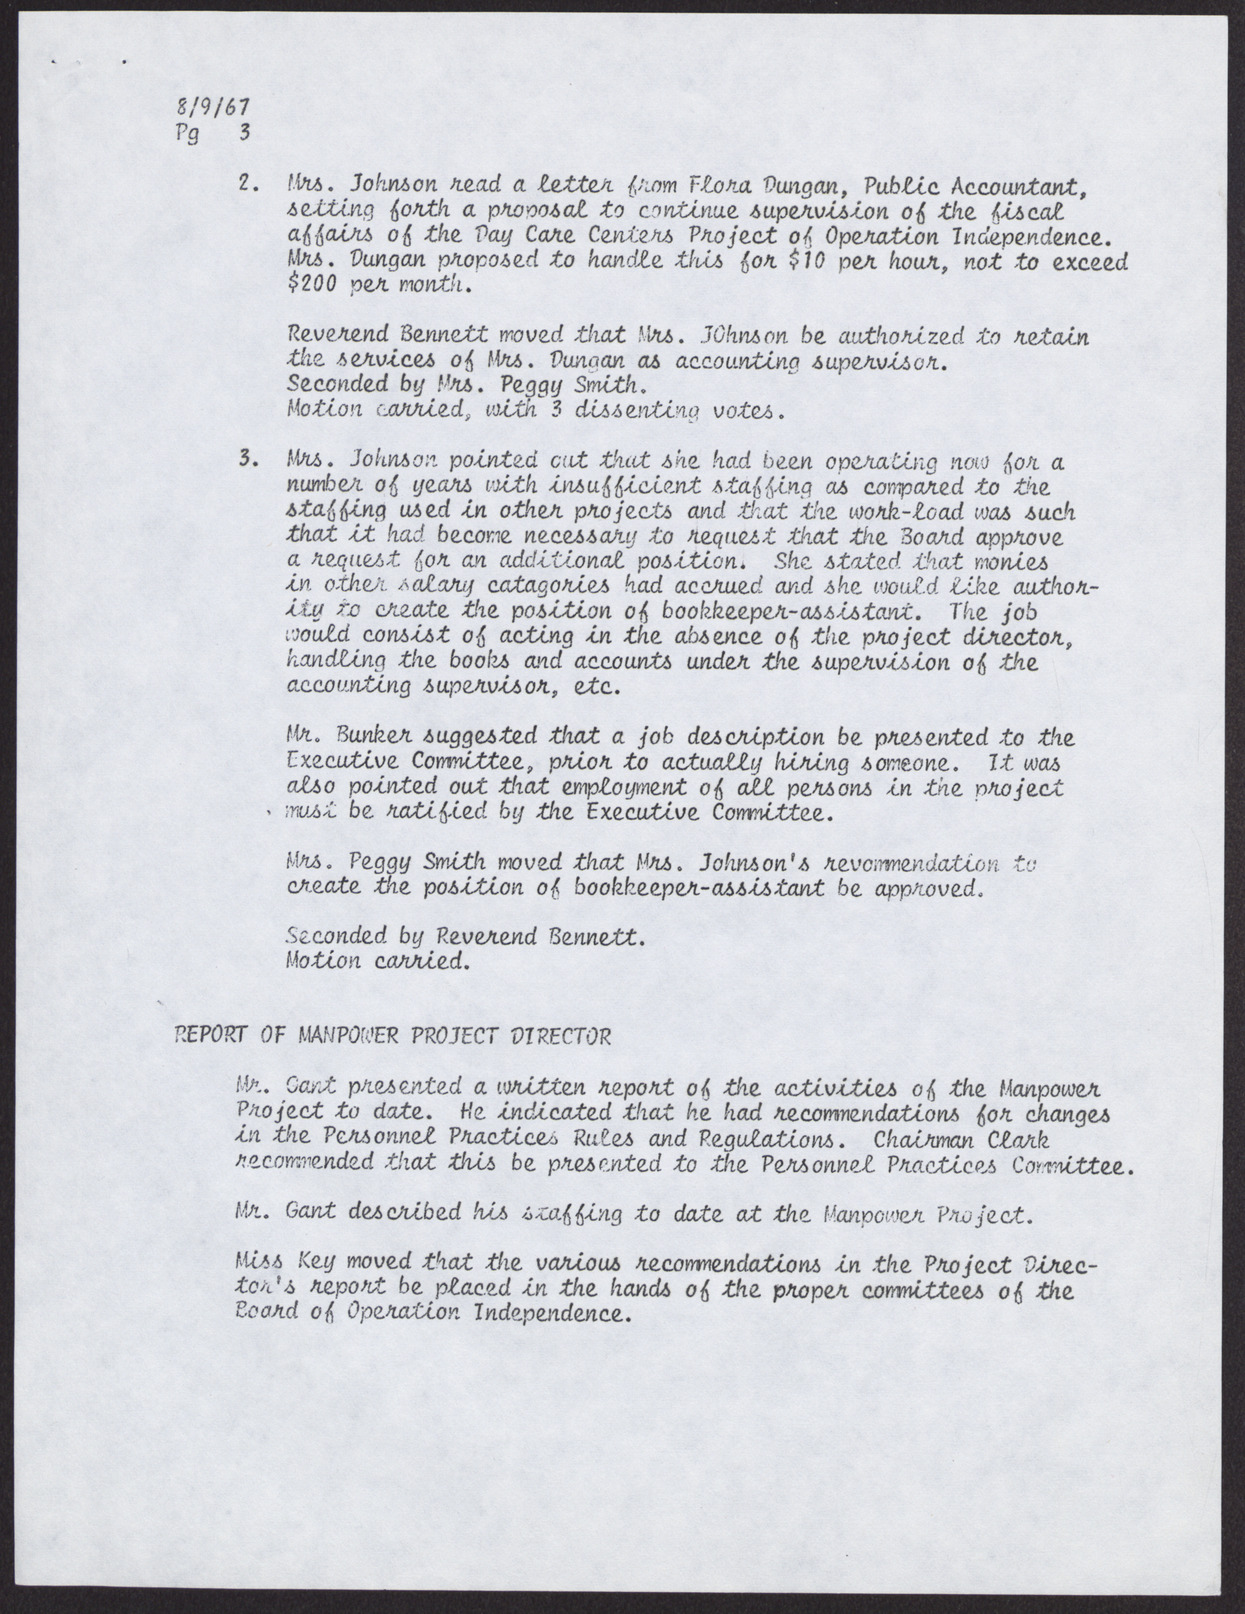 Minutes from Operation Independence Board Meeting (5 pages each), August 9, 1967, page 3